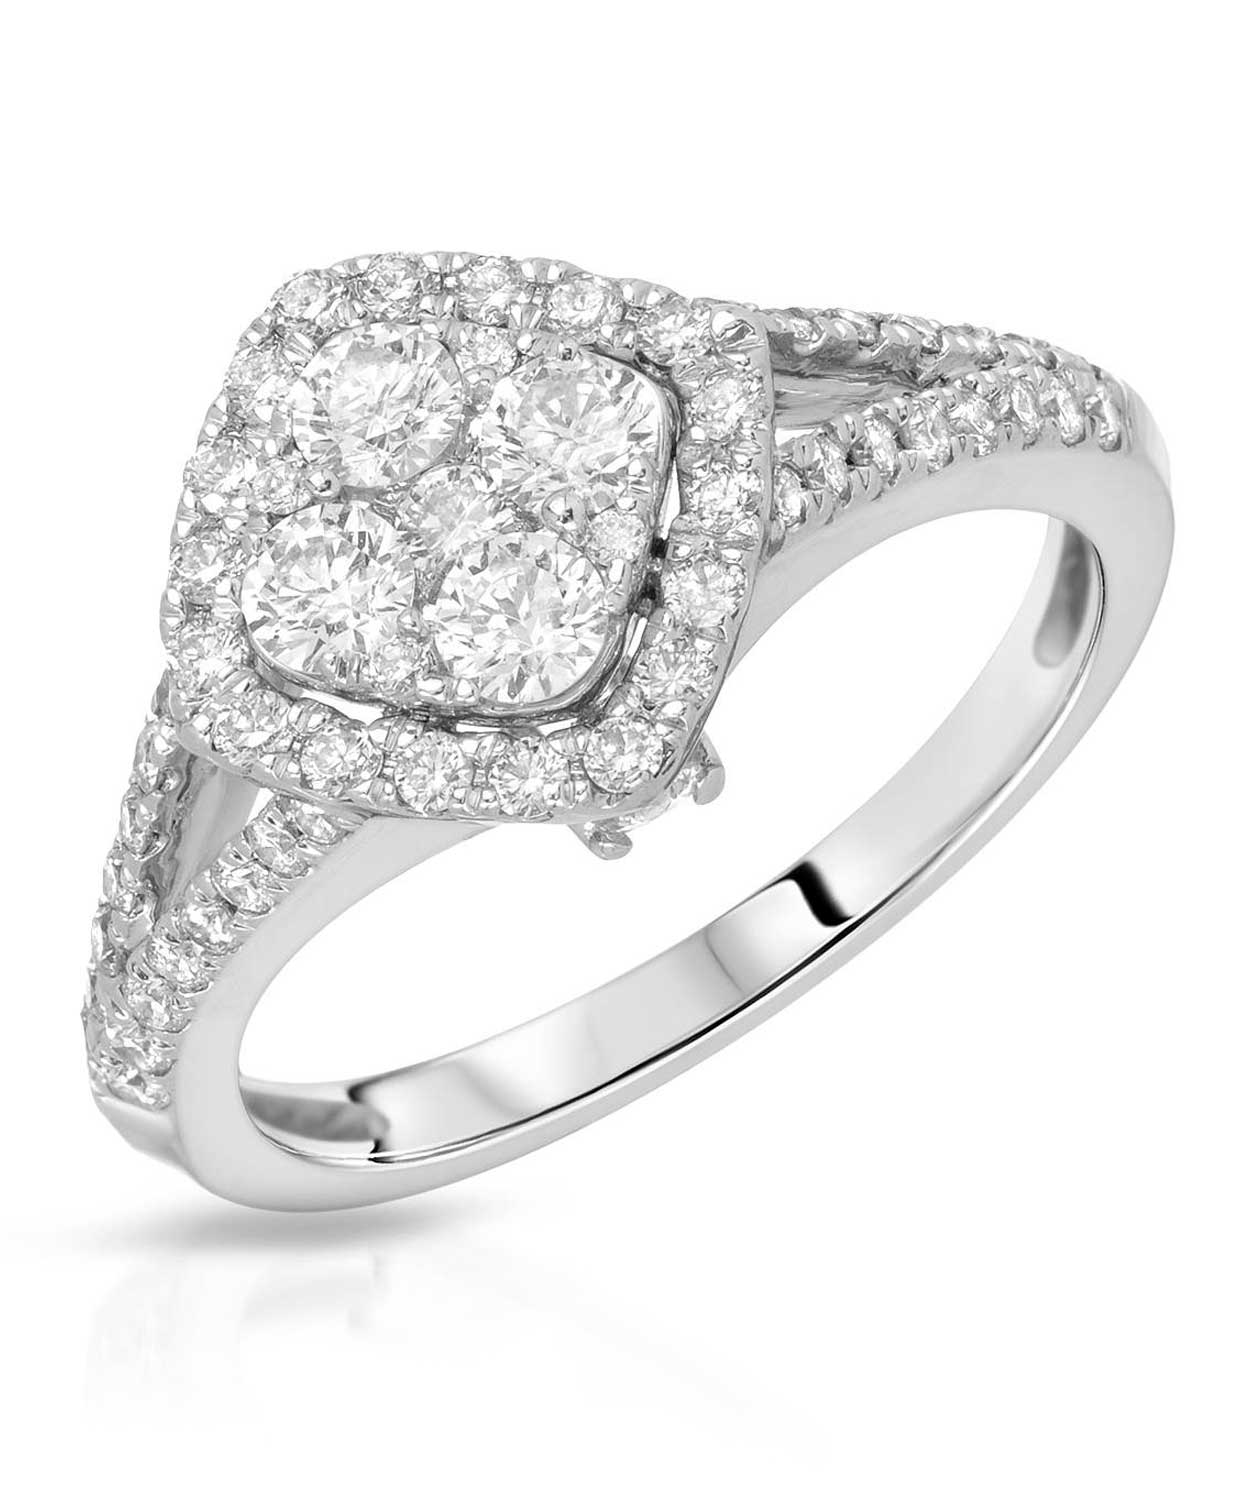 Signature Collection 0.95 ctw Diamond 14k White Gold Cluster Engagement Ring View 1